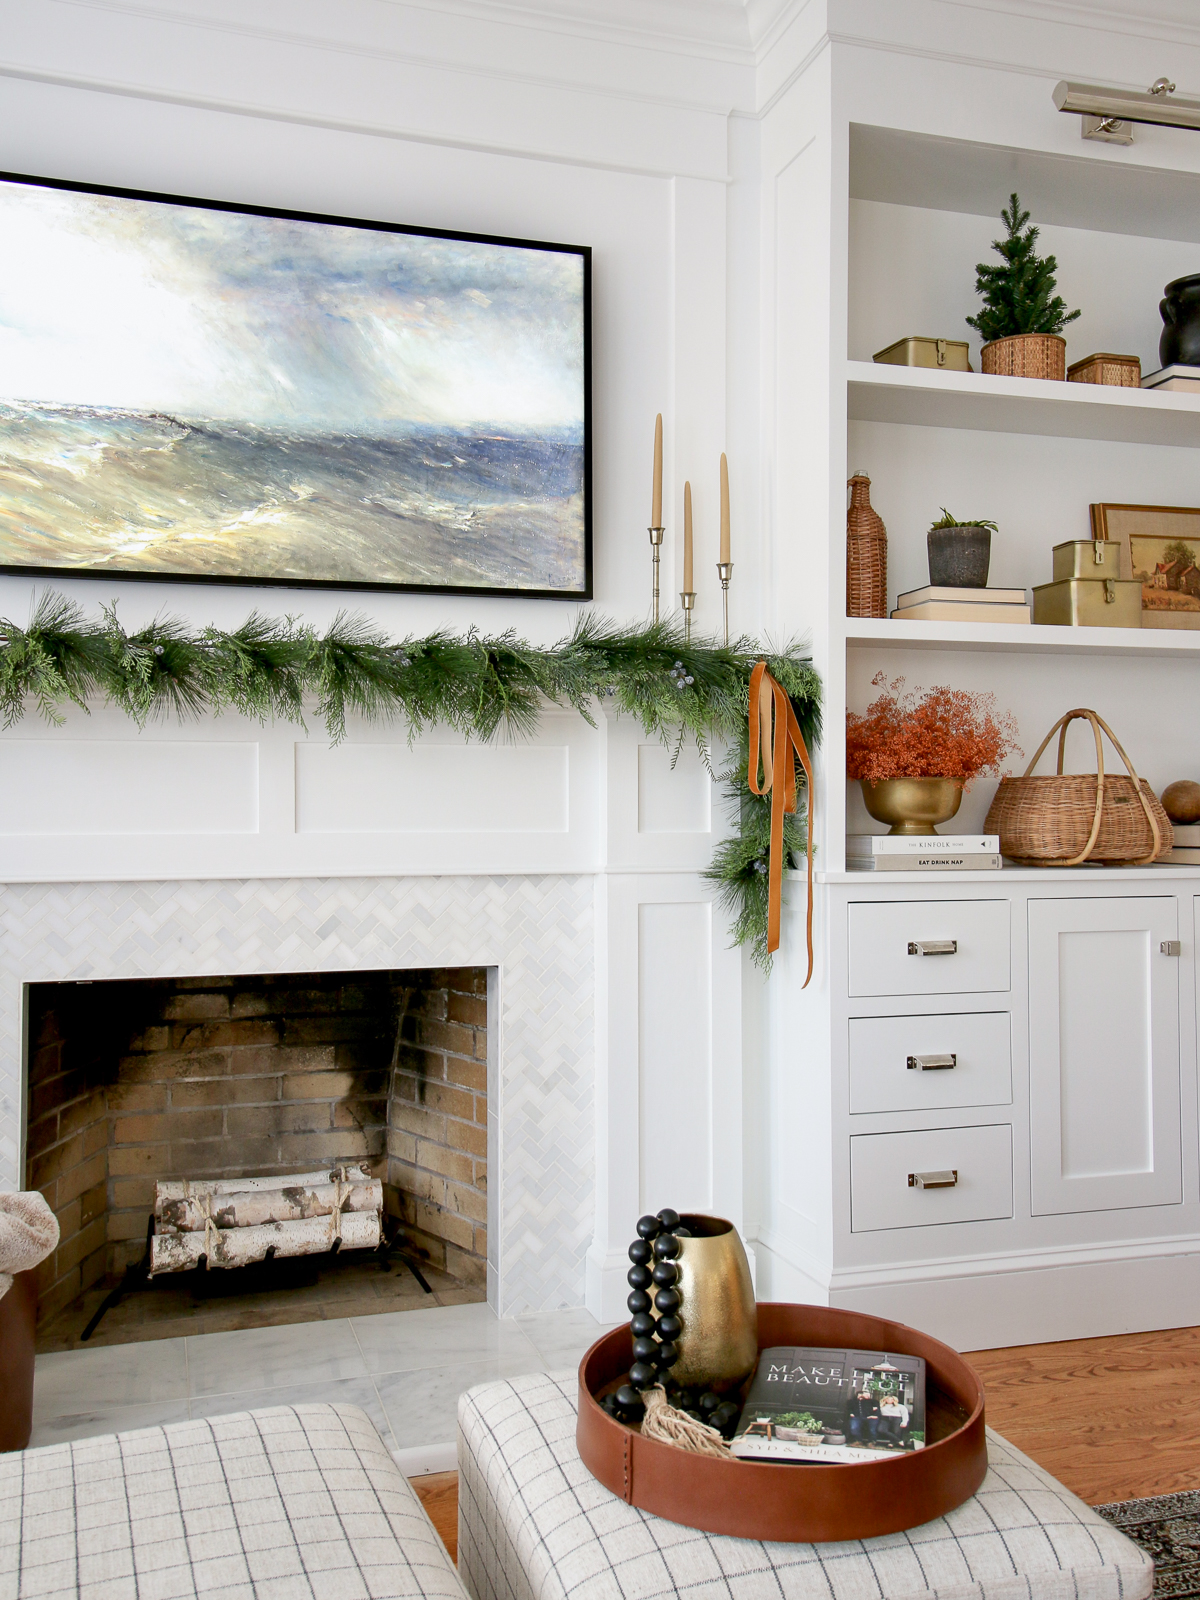 frame tv above fireplace with garland on mantel. Shelf decor on builtins next to fireplace